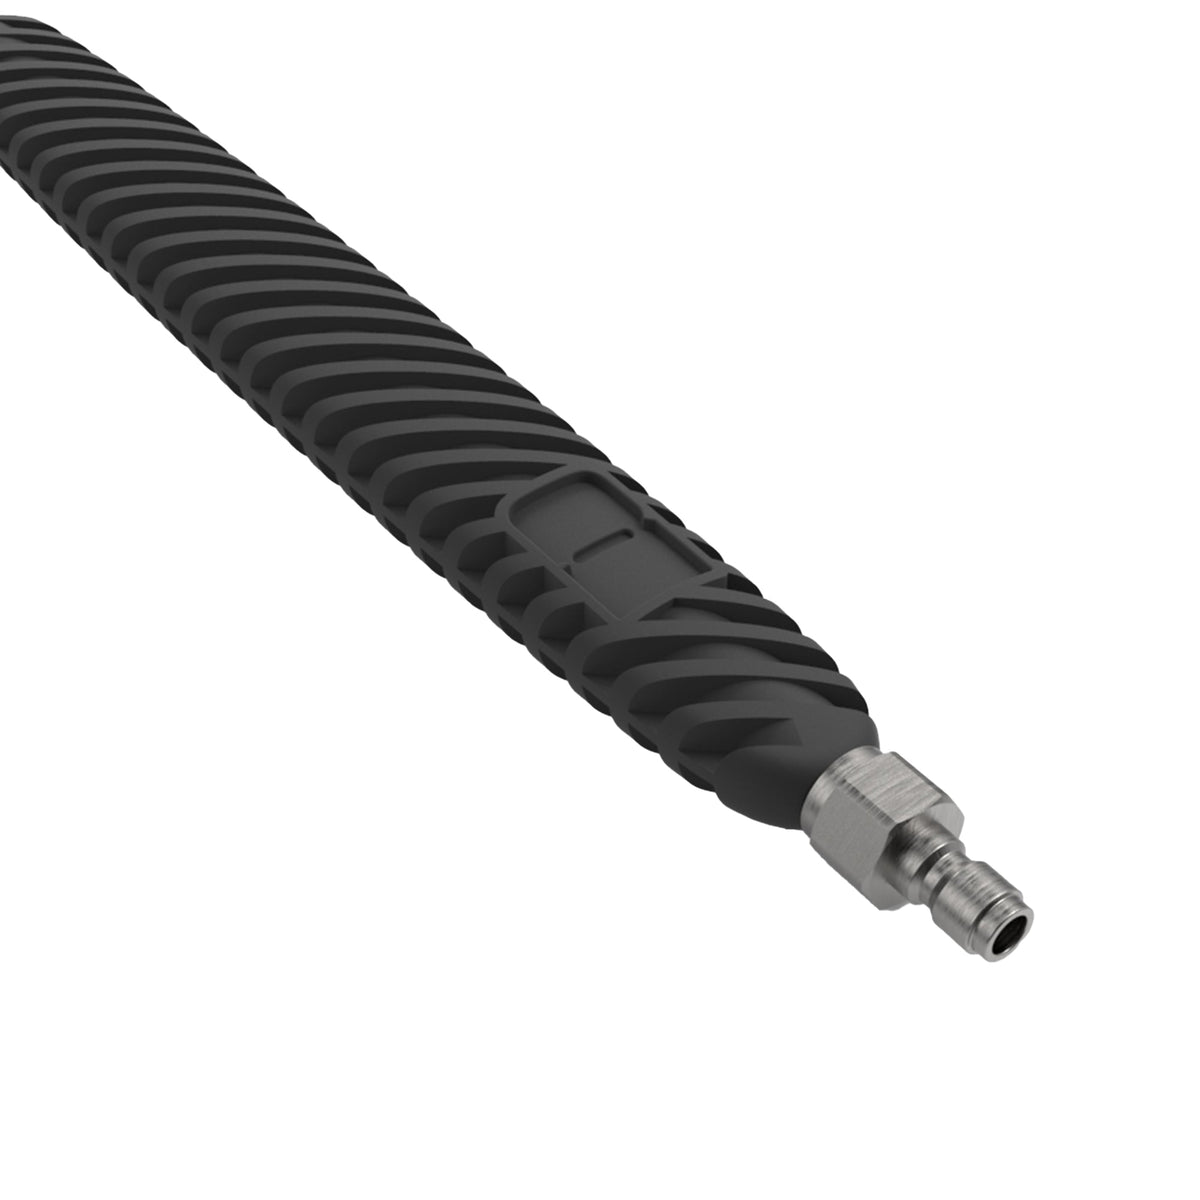 A close-up image of an Active™ Premium Pressure Washer Lance by Active Products Inc., featuring a black, ribbed, flexible hose with a 304 stainless steel connector at the end. The design suggests durability and flexibility, typical for industrial or mechanical uses.